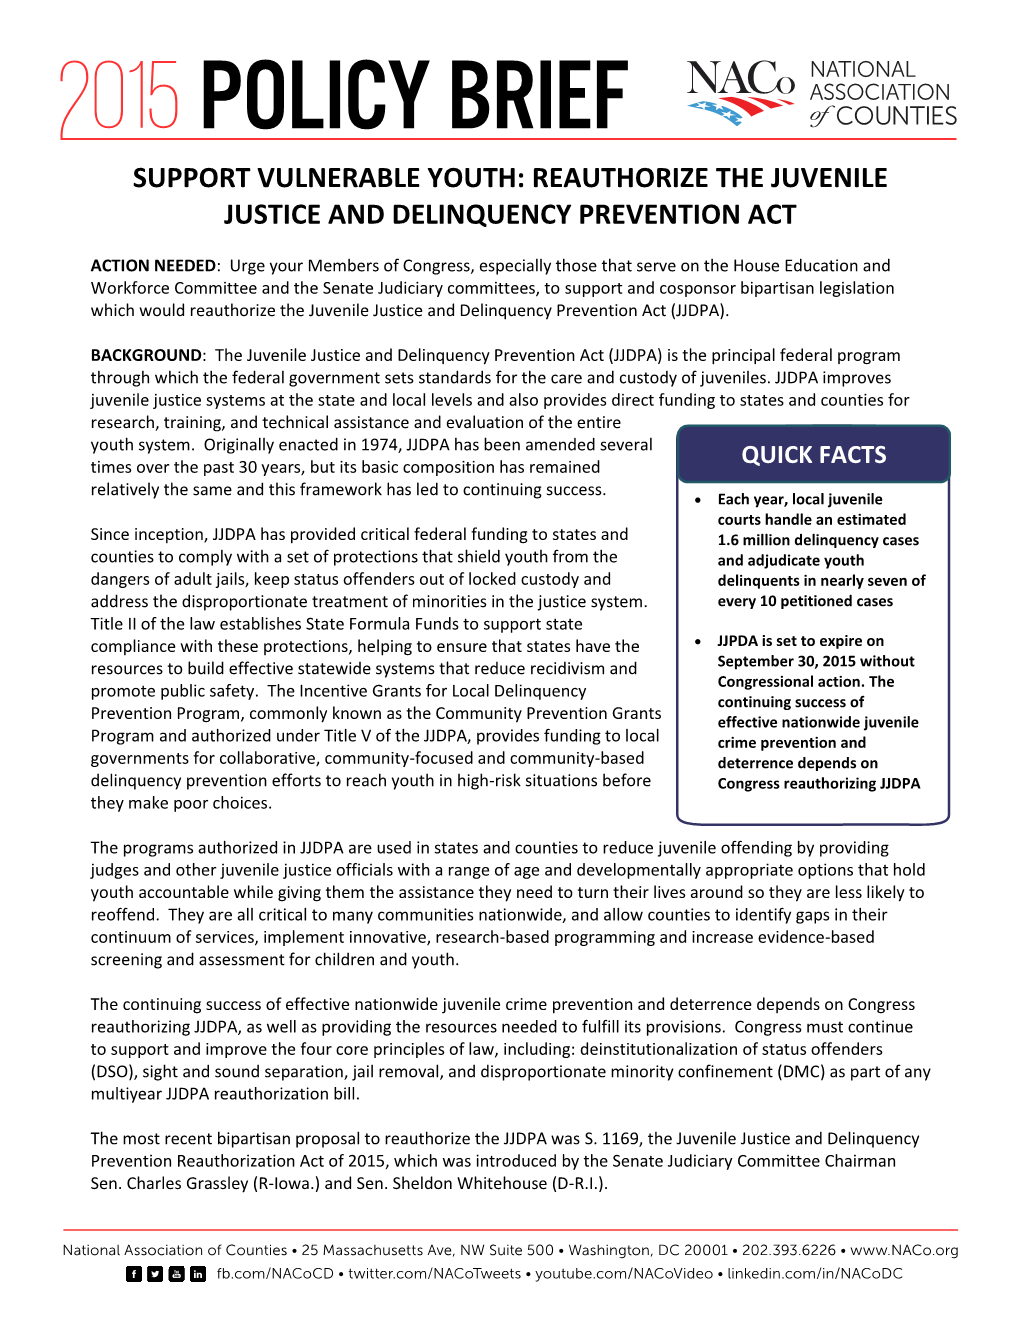 Support Vulnerable Youth: Reauthorize the Juvenile Justice and Delinquency Prevention Act